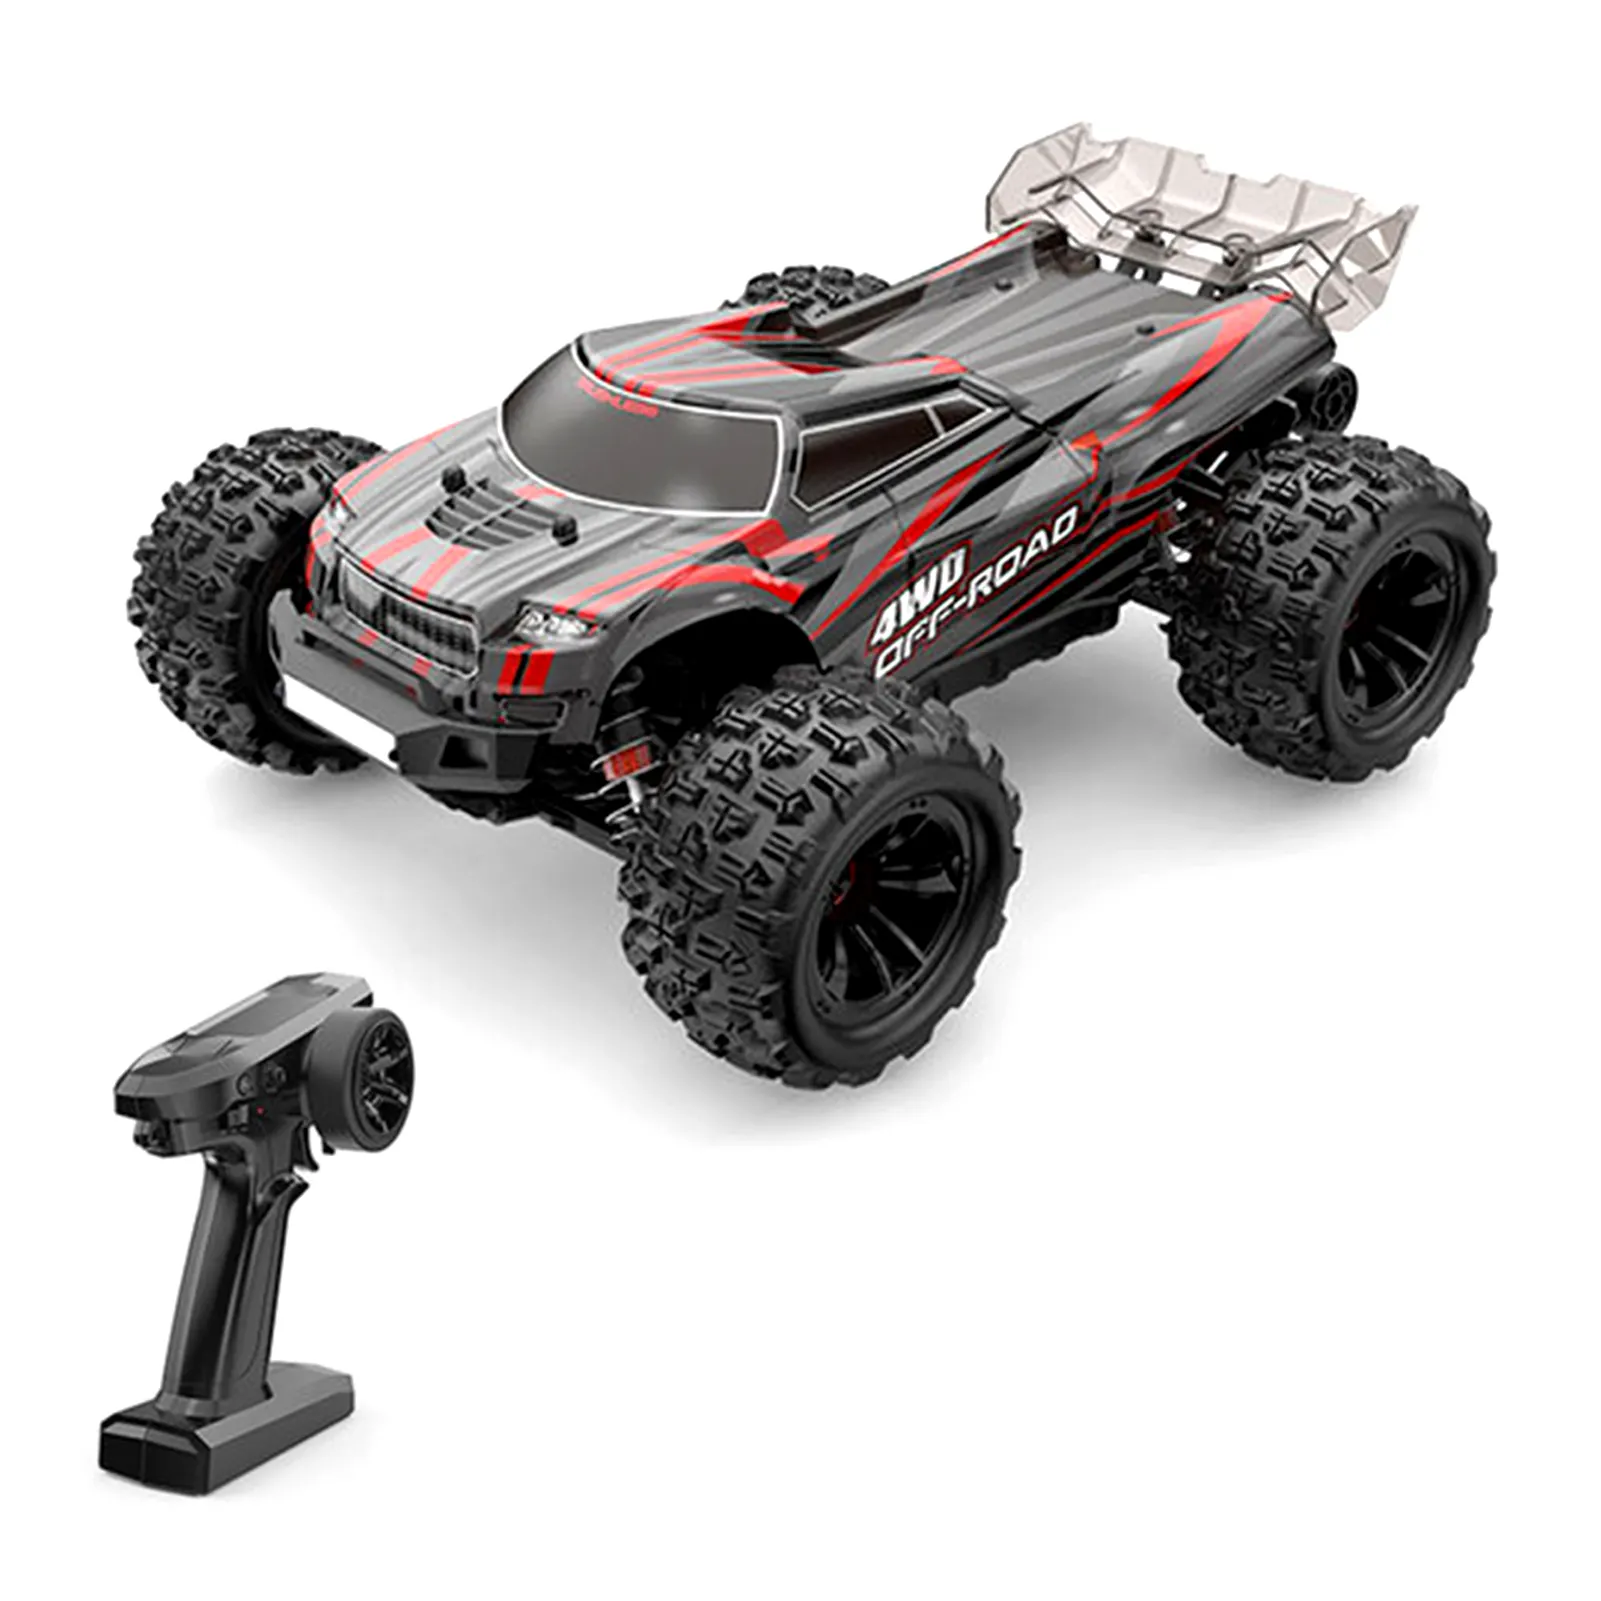 MJX RC Car 2.4Ghz 4WD 1/16 Off Road RC Trucks Brushless Motor 45KM/H High Speed Vehicle Racing Climbing RC Car for Kids Adults